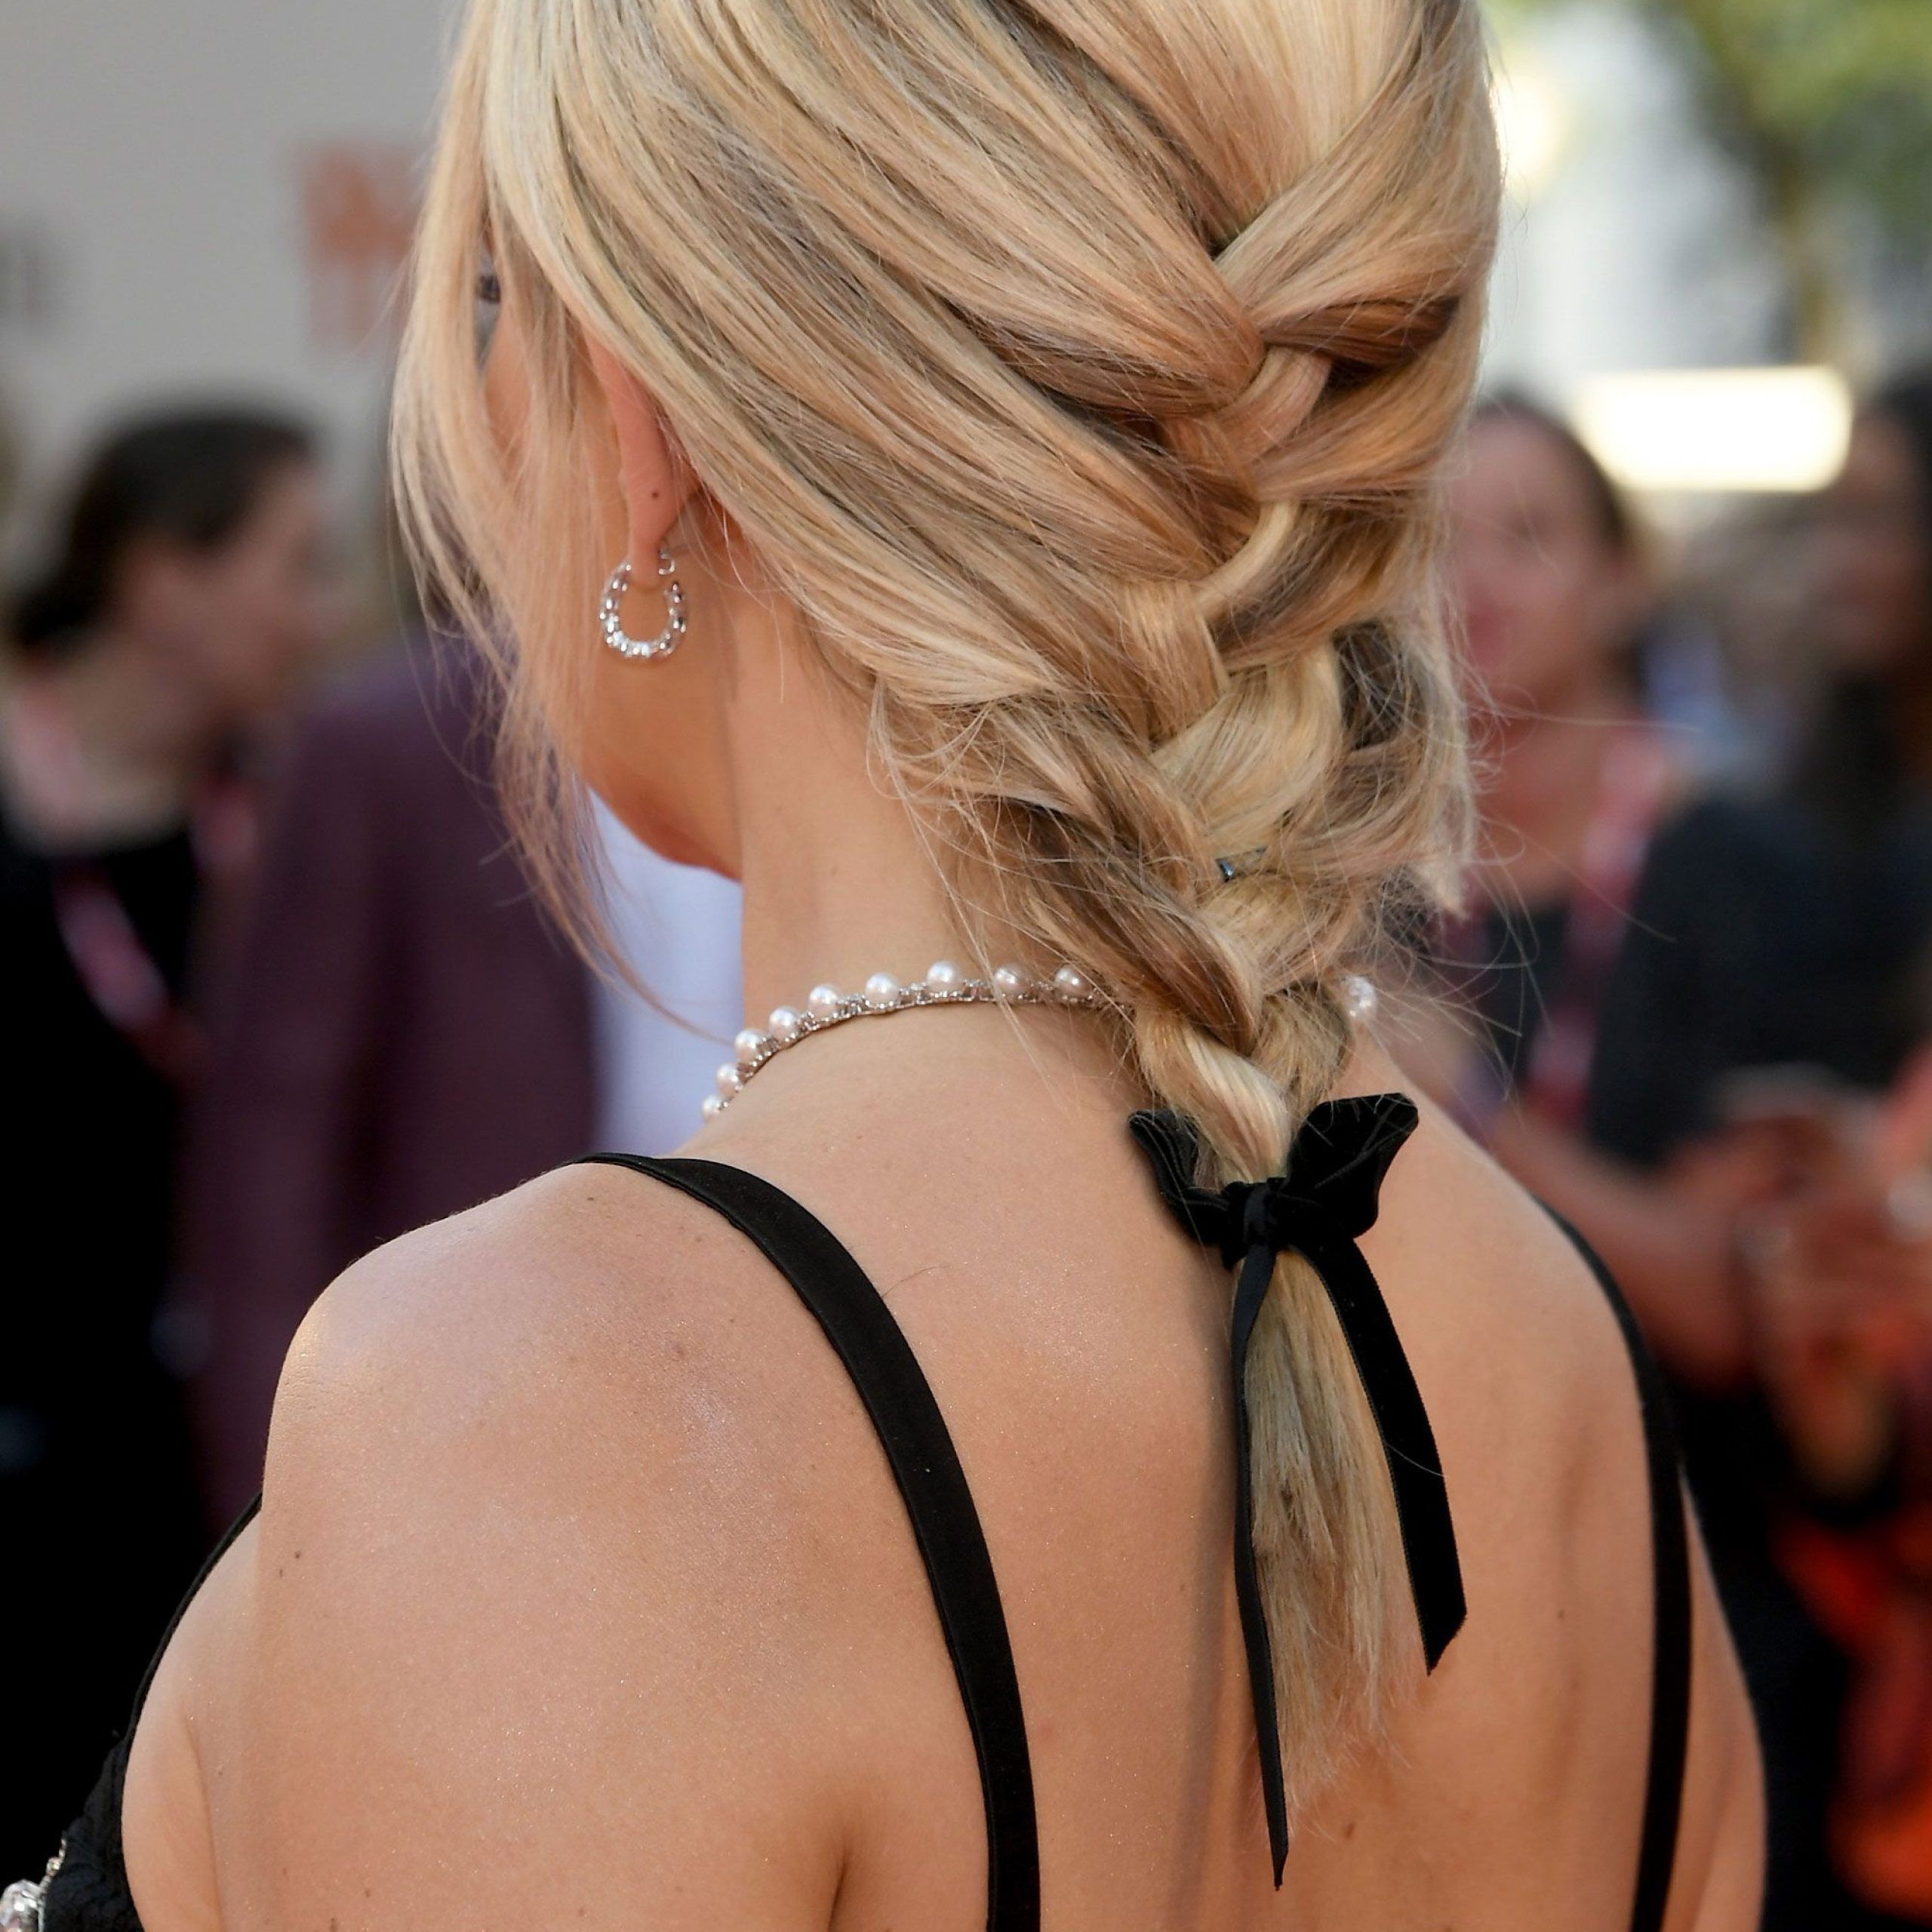 35 Easy Updo Hairstyles – Elegant Updos Inspiredcelebrities For Latest Ponytail Updo Hairstyles For Medium Hair (View 19 of 36)